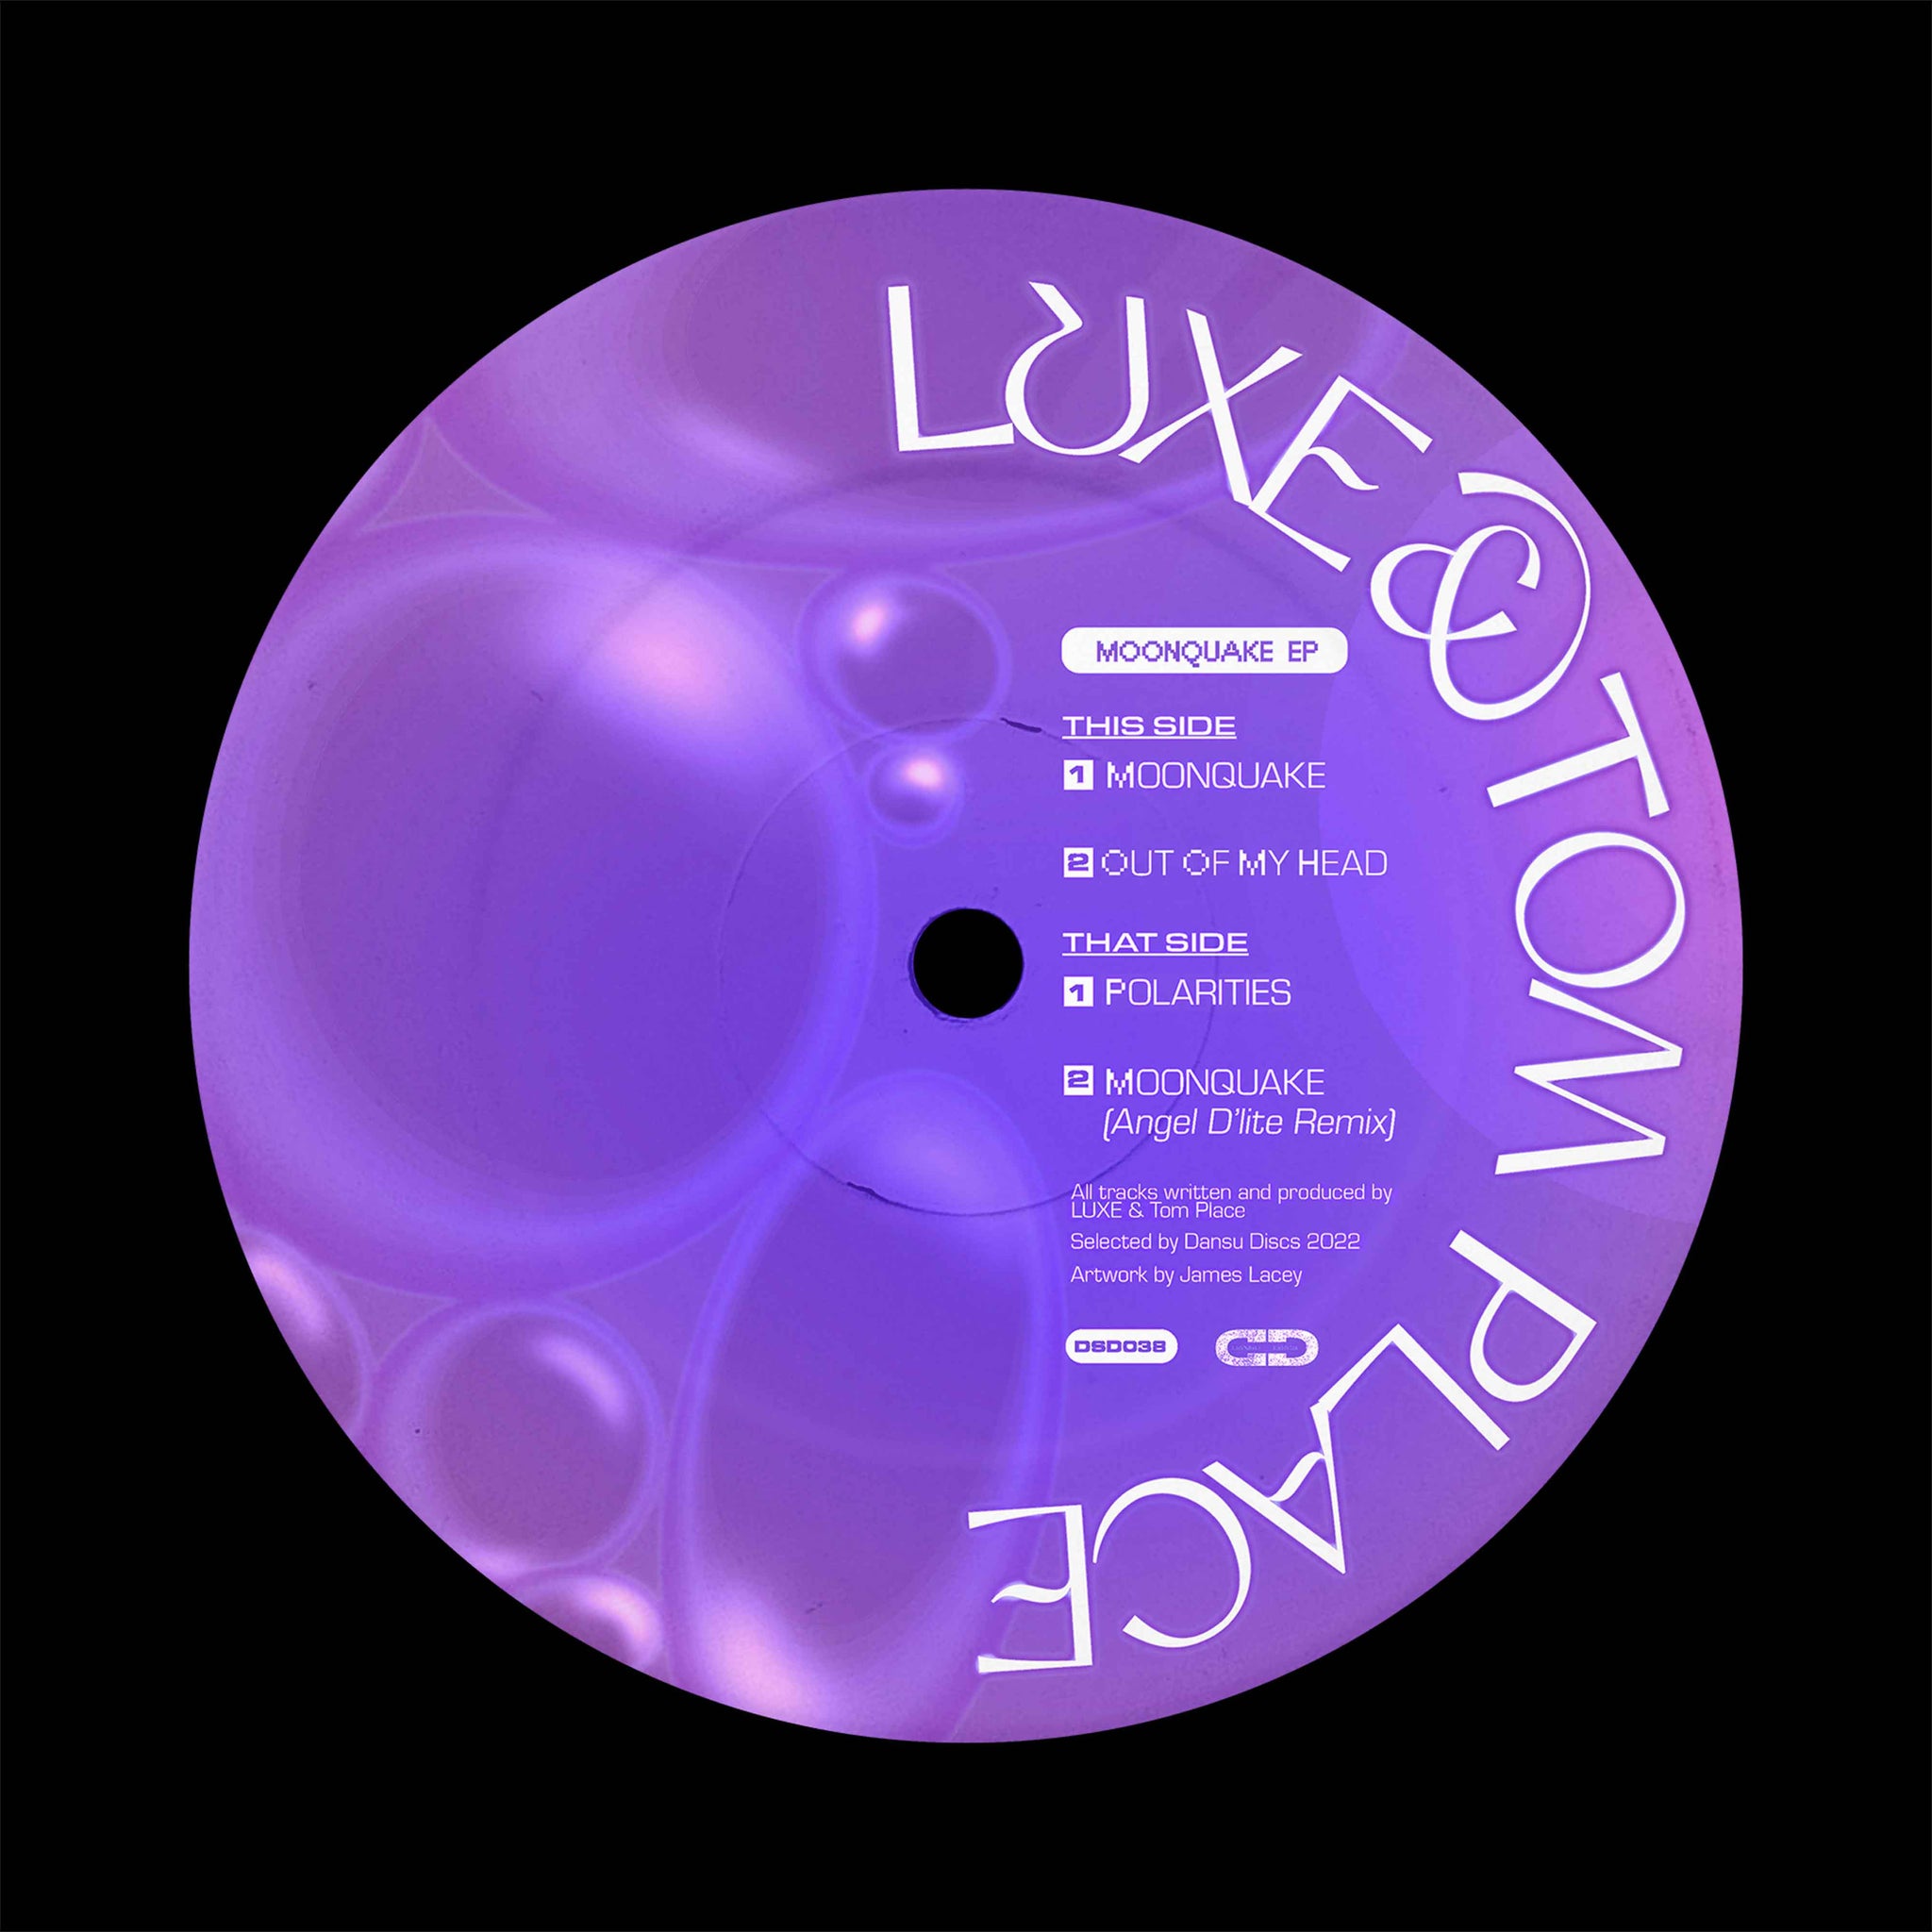 LUXE & TOM PLACE 'MOONQUAKE EP'